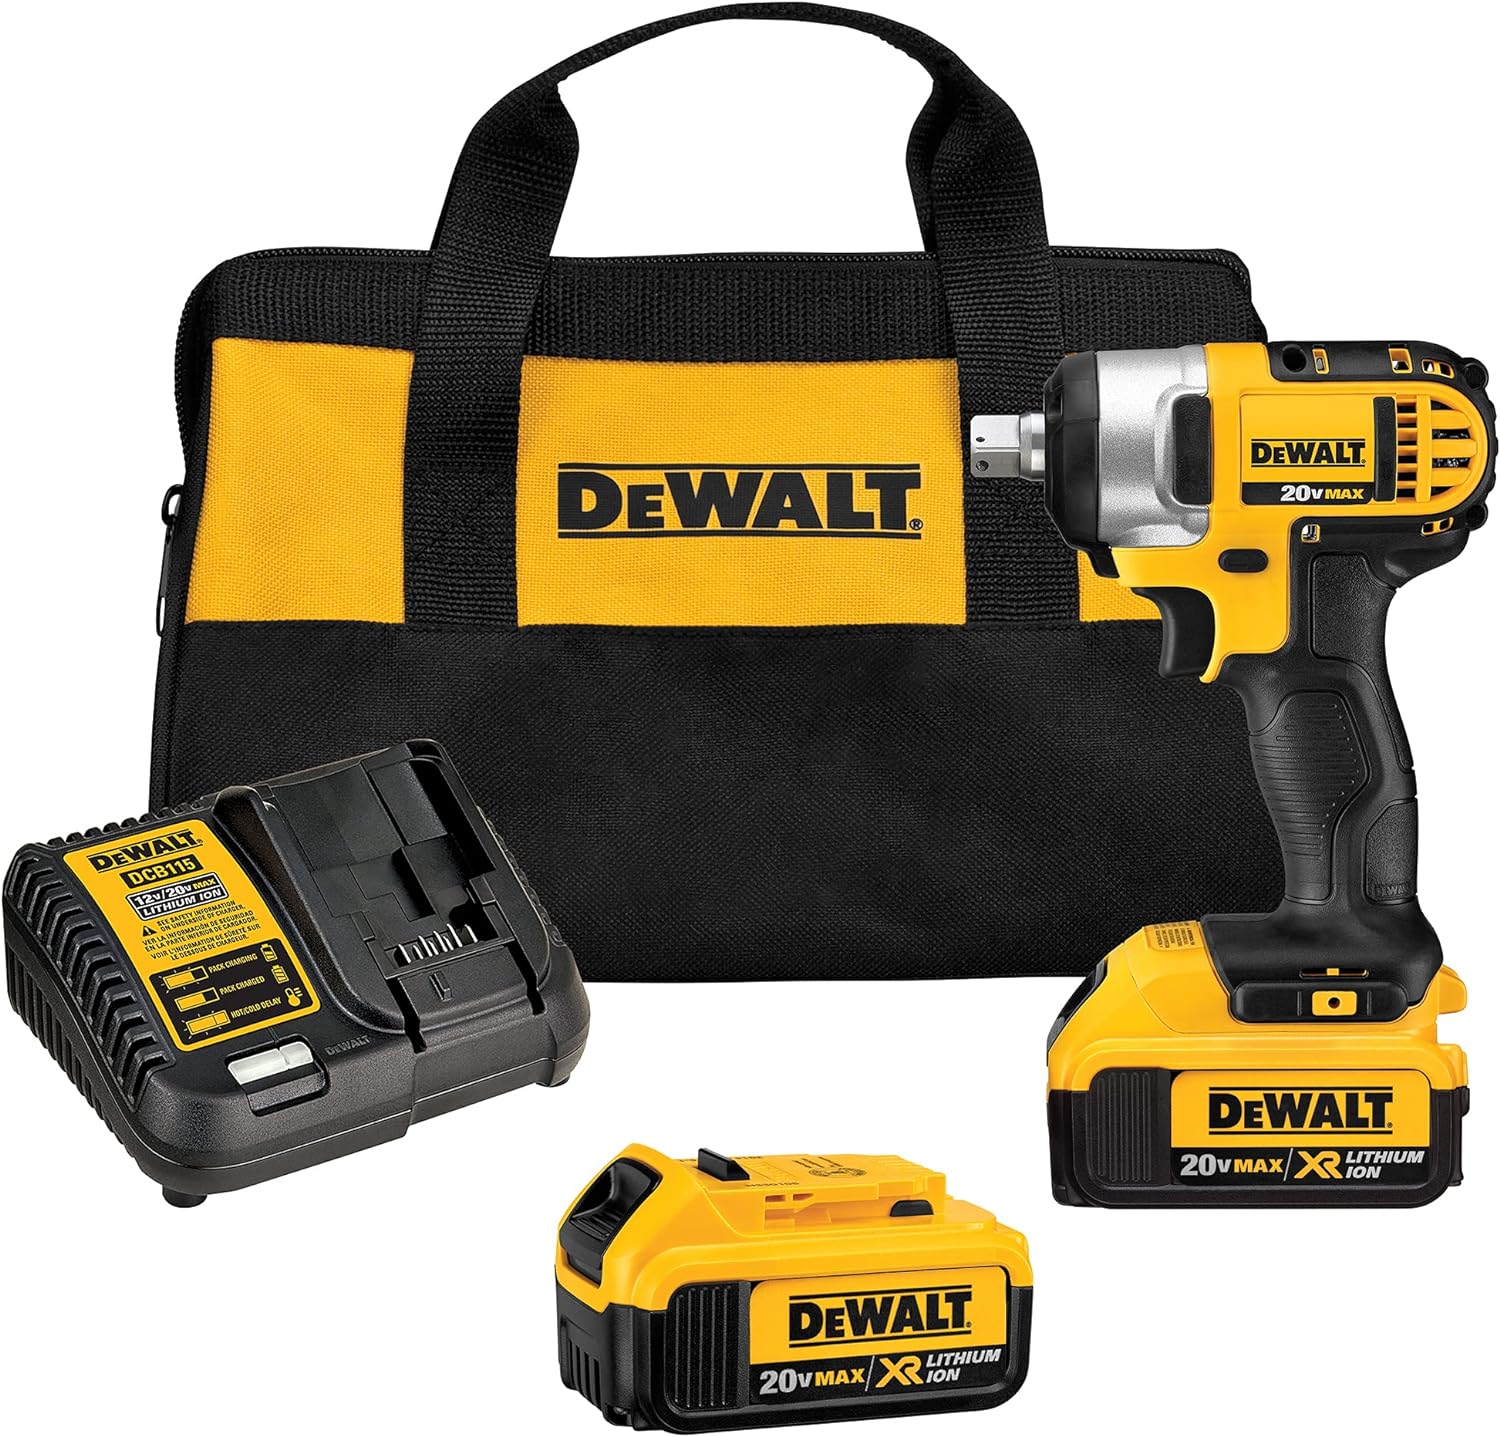 DEWALT DCF880M2 20-volt MAX Lithium Ion 1/2-Inch Impact Wrench Kit with Detent Pin, Yellow